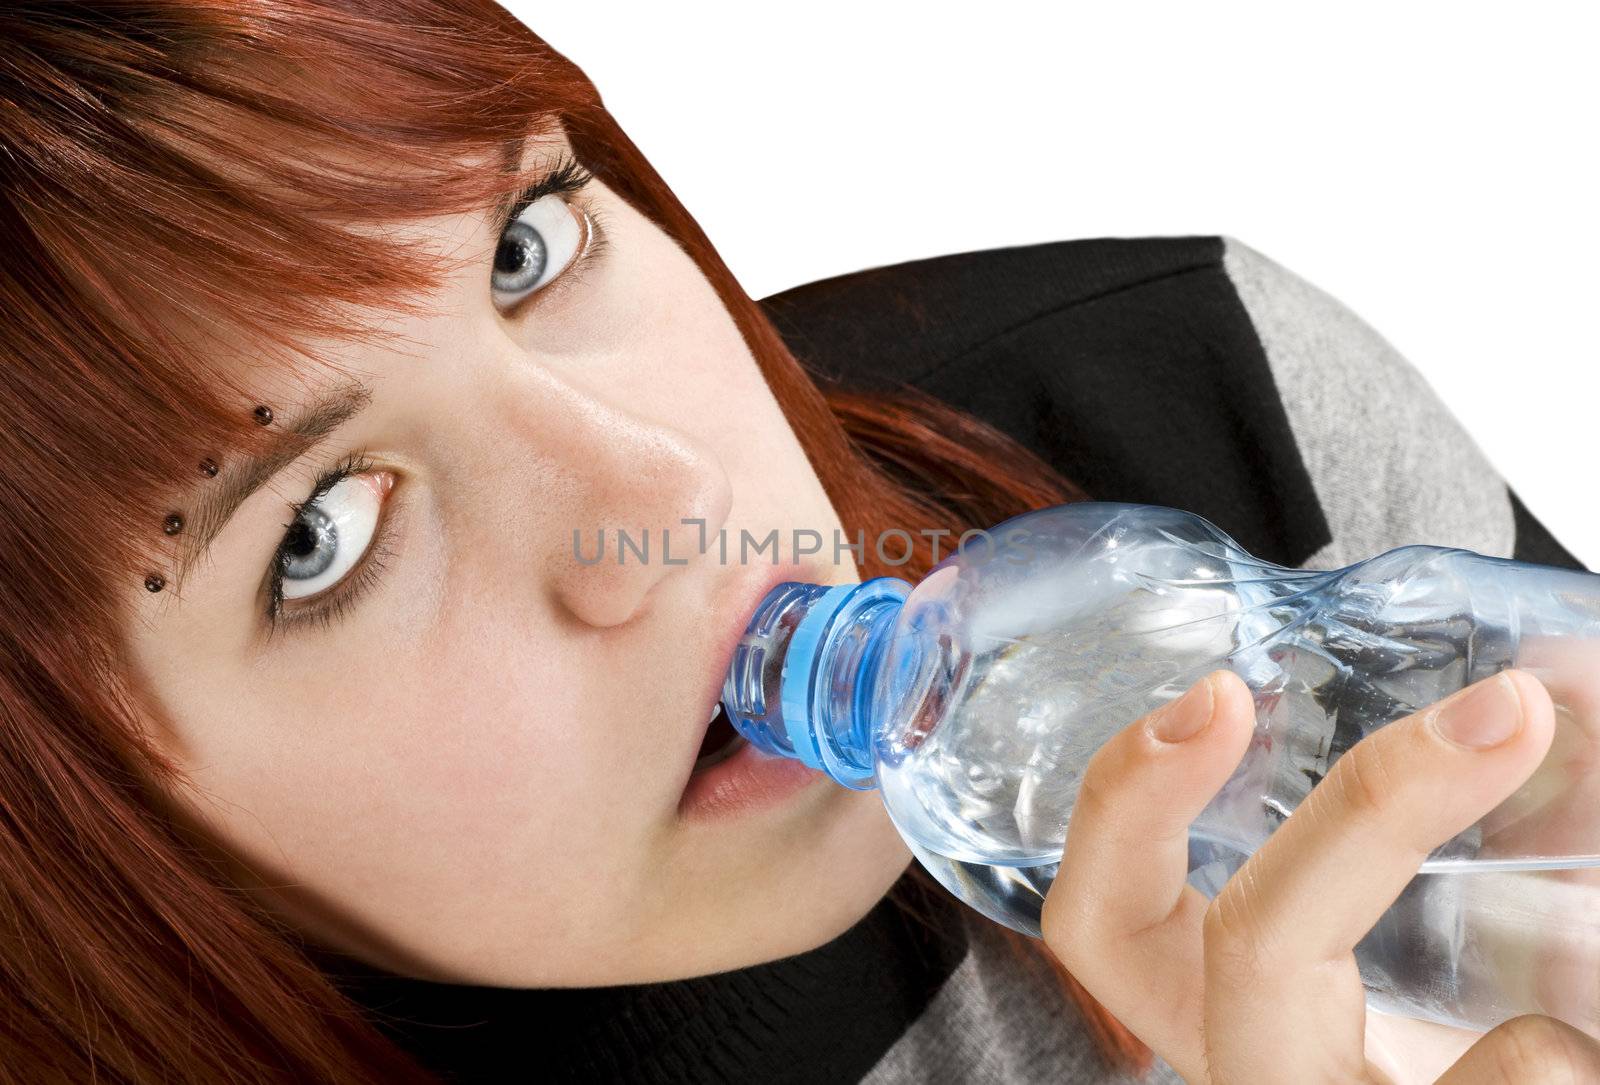 Seductive redhead girl looking at camera and drinking a bottle of water.

Studio shot.